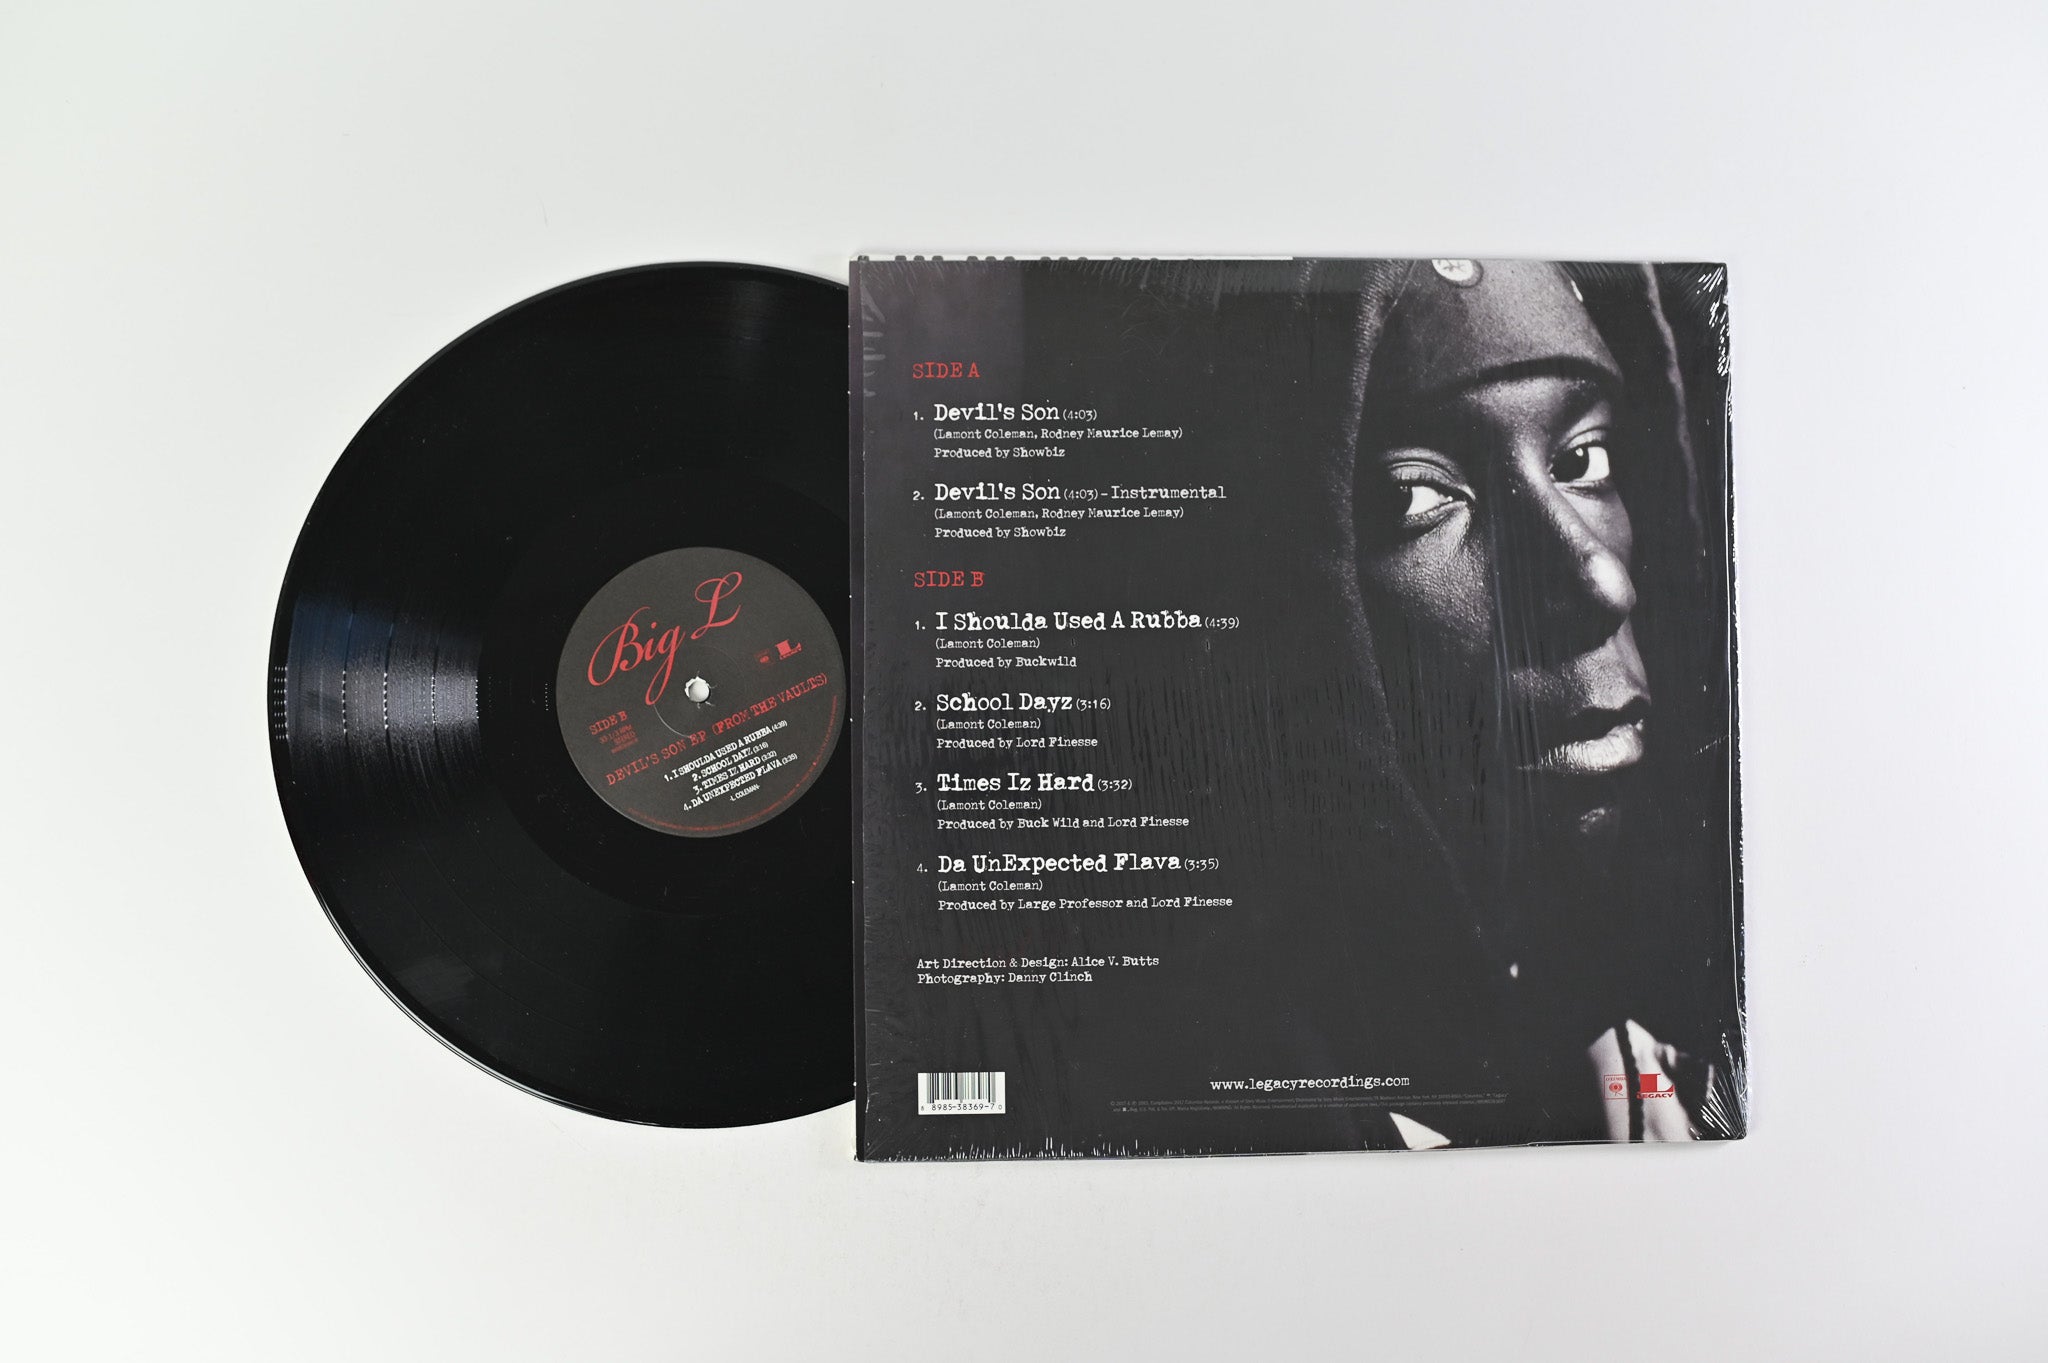 Big L - Devil's Son EP (From The Vaults) on Columbia RSD Ltd Edition